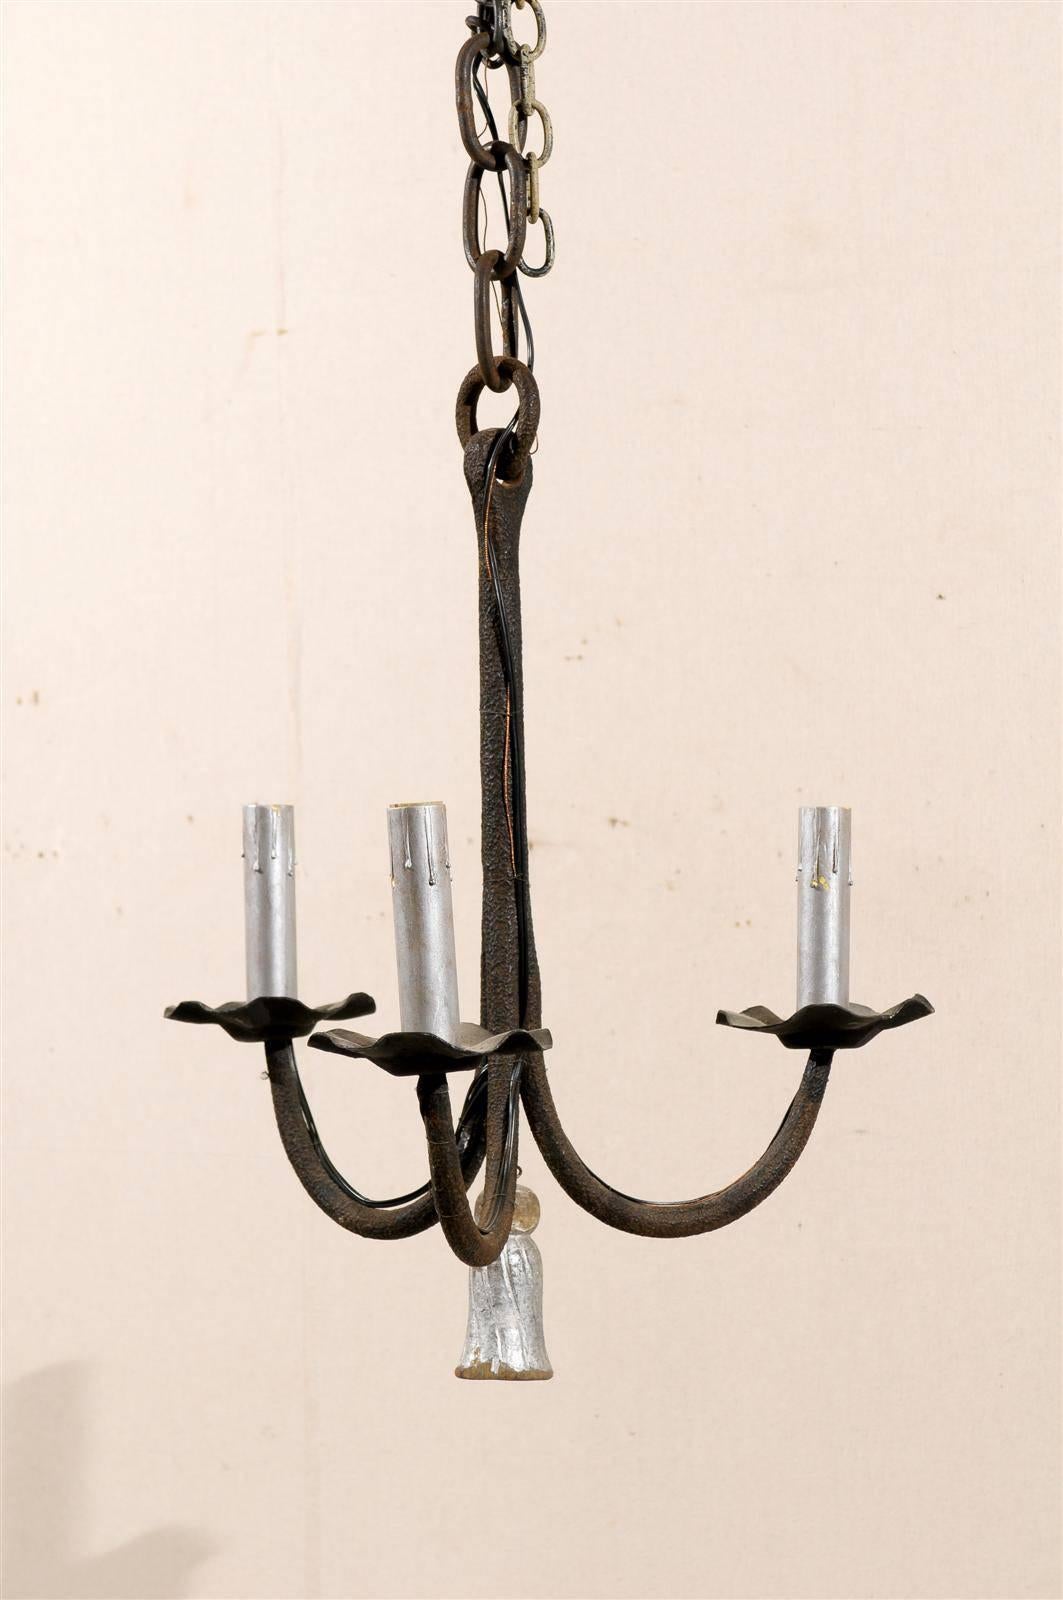 A French three-light iron chandelier. This French chandelier from the early 20th century features swoop arms supporting flower-shaped bobèches and painted candles covers. The lower section of the chandelier is decorated with a silver colored tassel